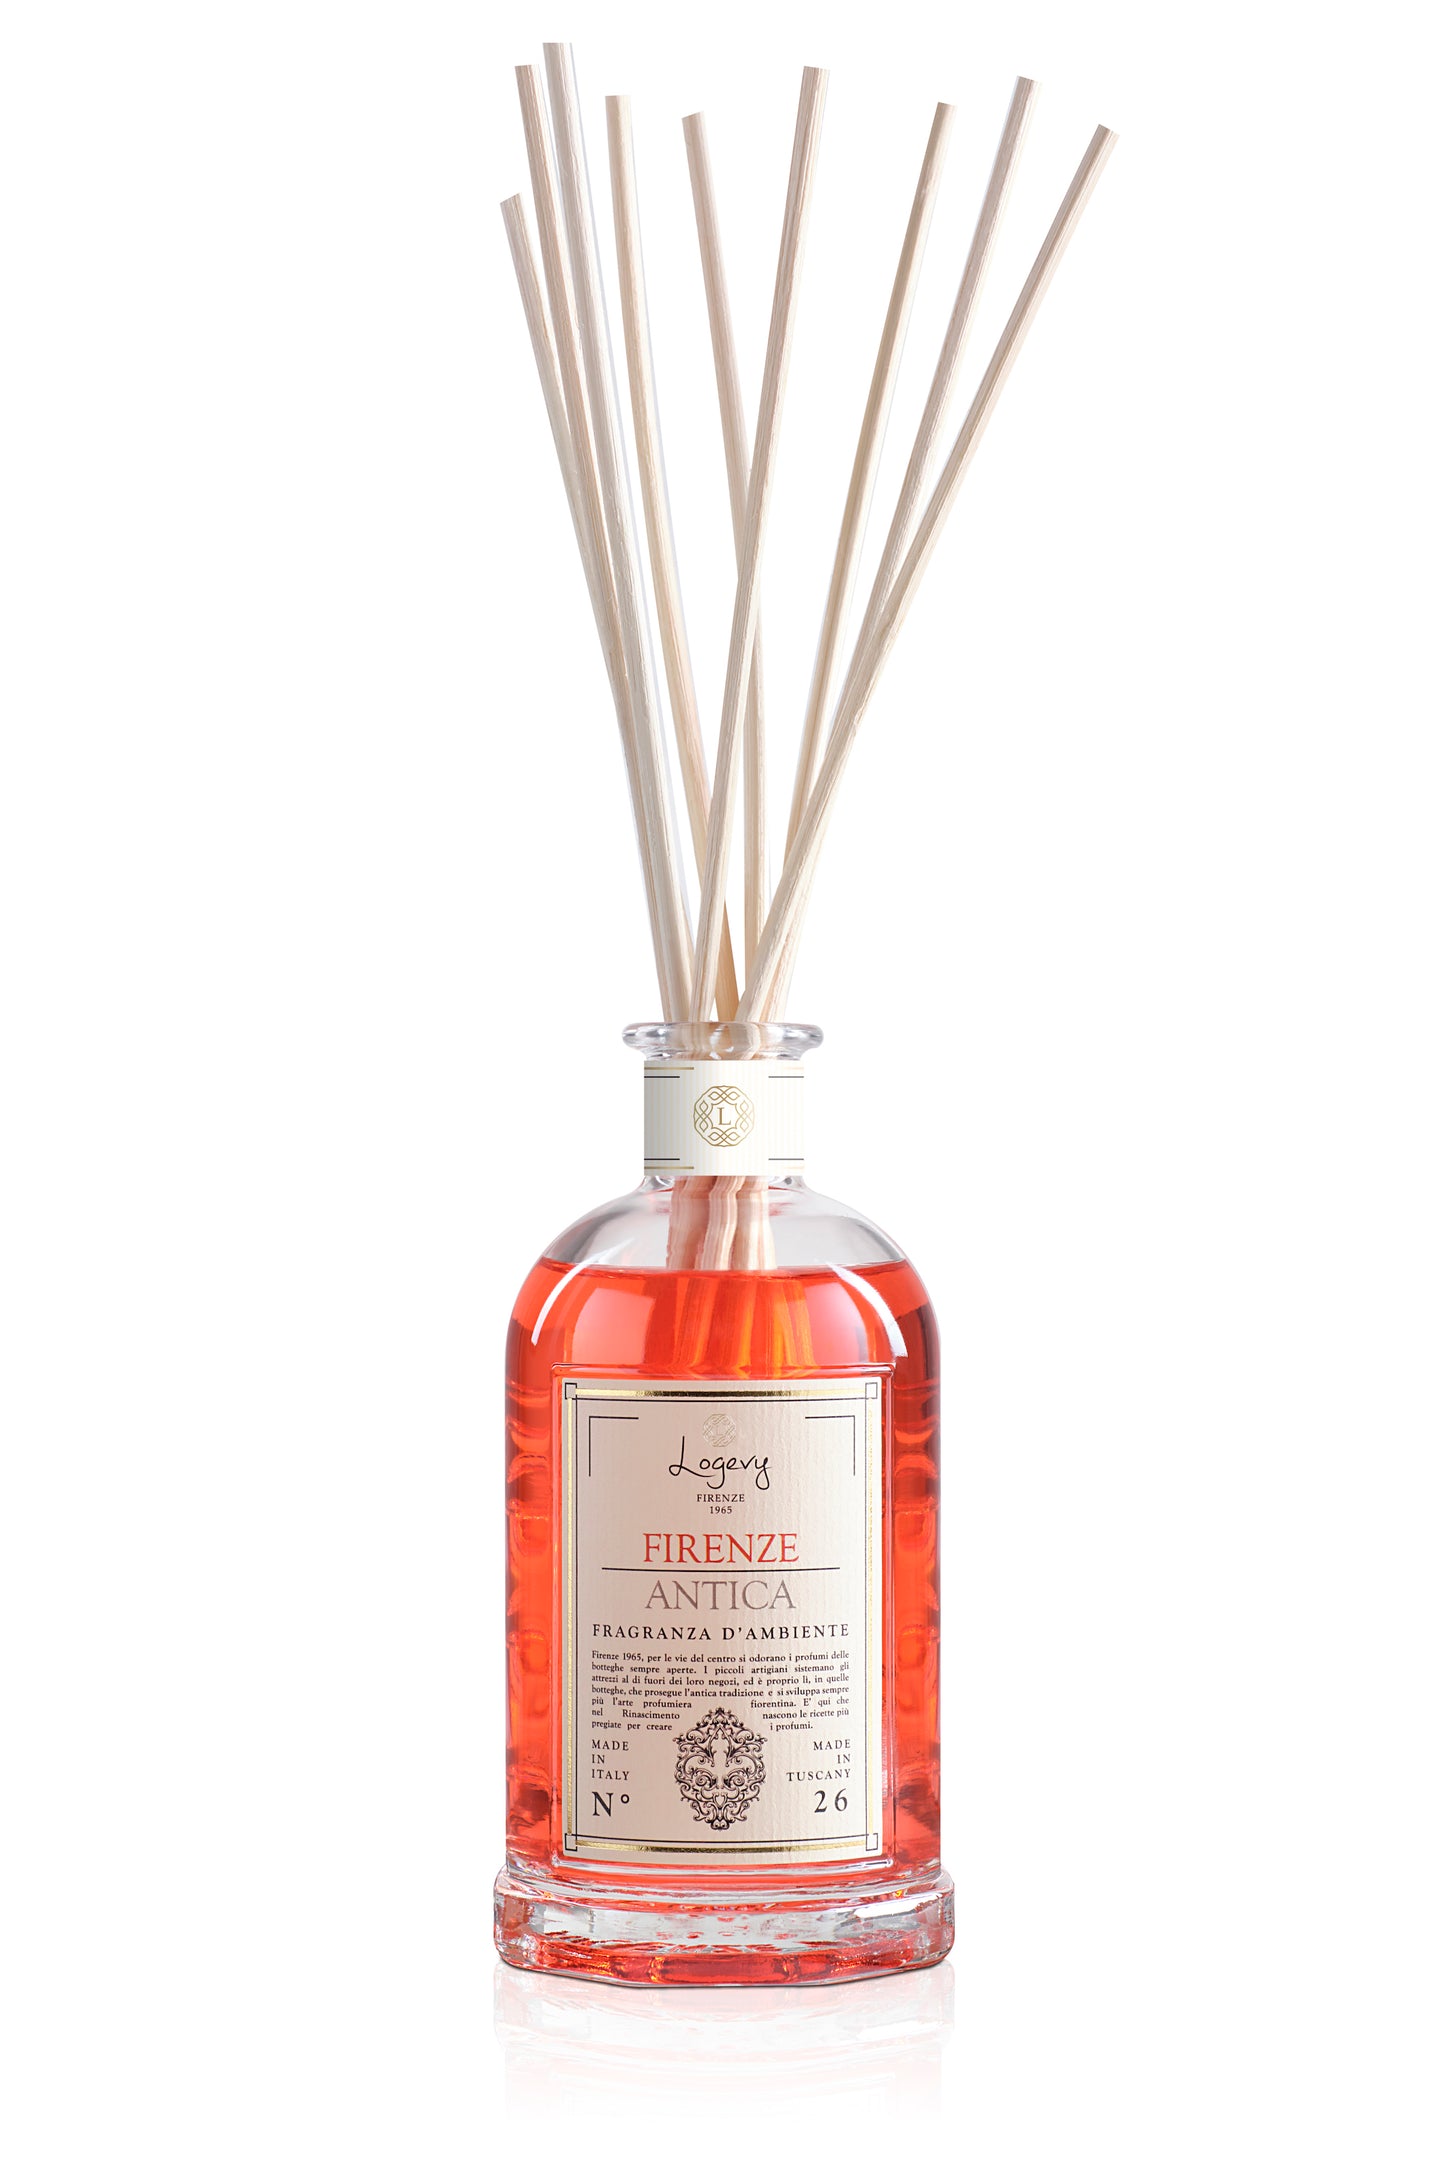 LOGEVY Firenze Antica Diffuser 3000ml - Elegant Glass Bottle with Rich Aroma Blend - Now Available at Local Florist Shop - FIORI Oakville